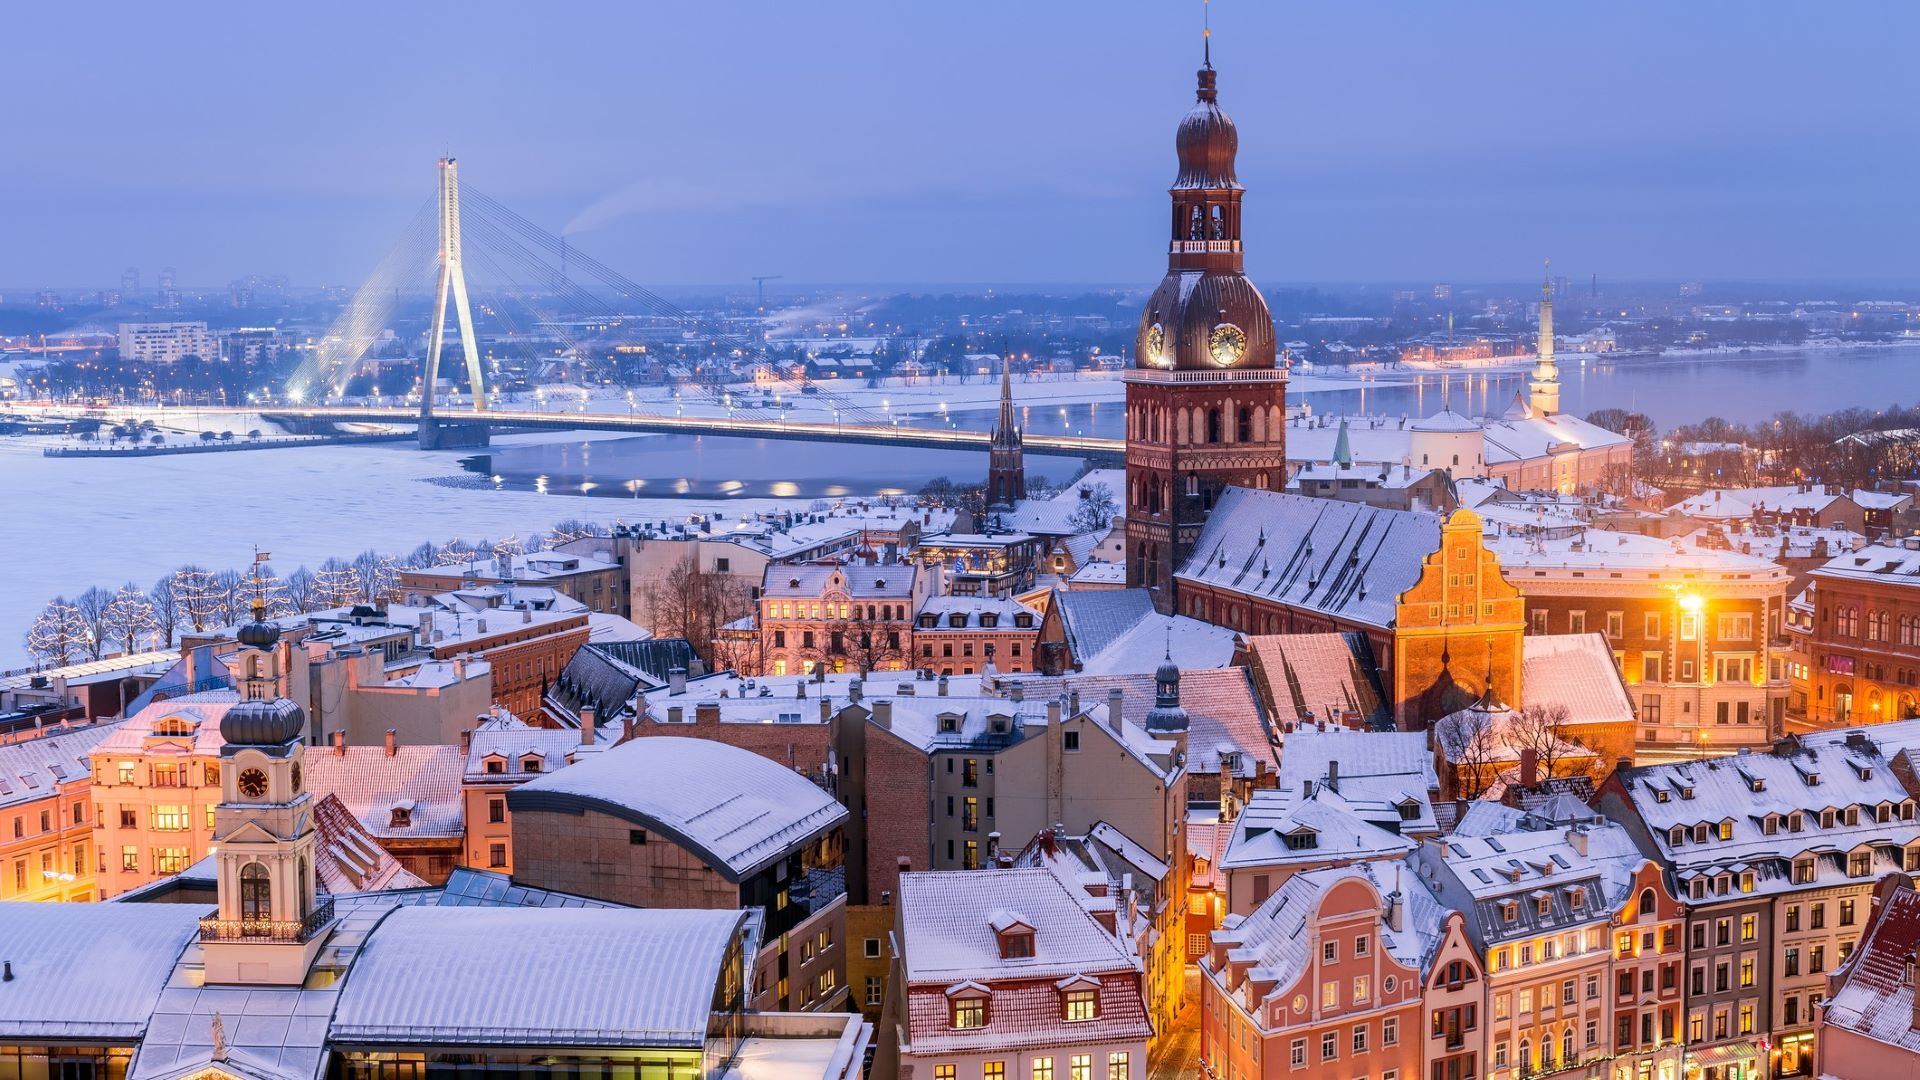 <p>                     The capital of Latvia offers several places to stay with your pet beside the Baltic Sea. Soak up some history as you walk around the city, check out the art nouveau architecture or visit the Old Town - your furry friend can accompany you for all of it.                    </p>